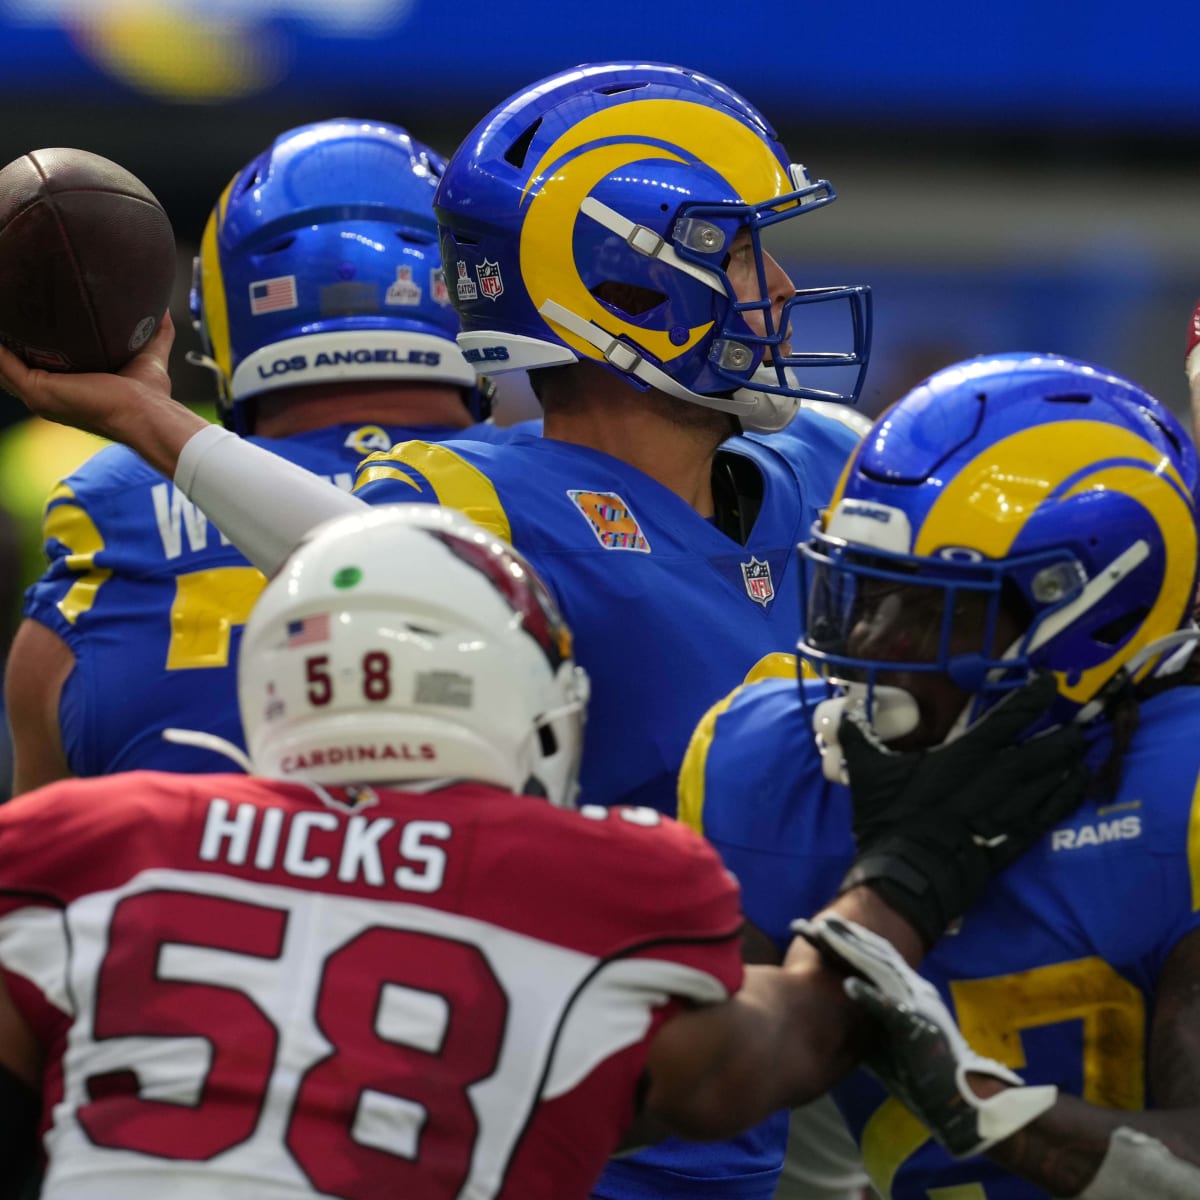 Cardinals visit Rams in meeting of stumbling NFC West rivals